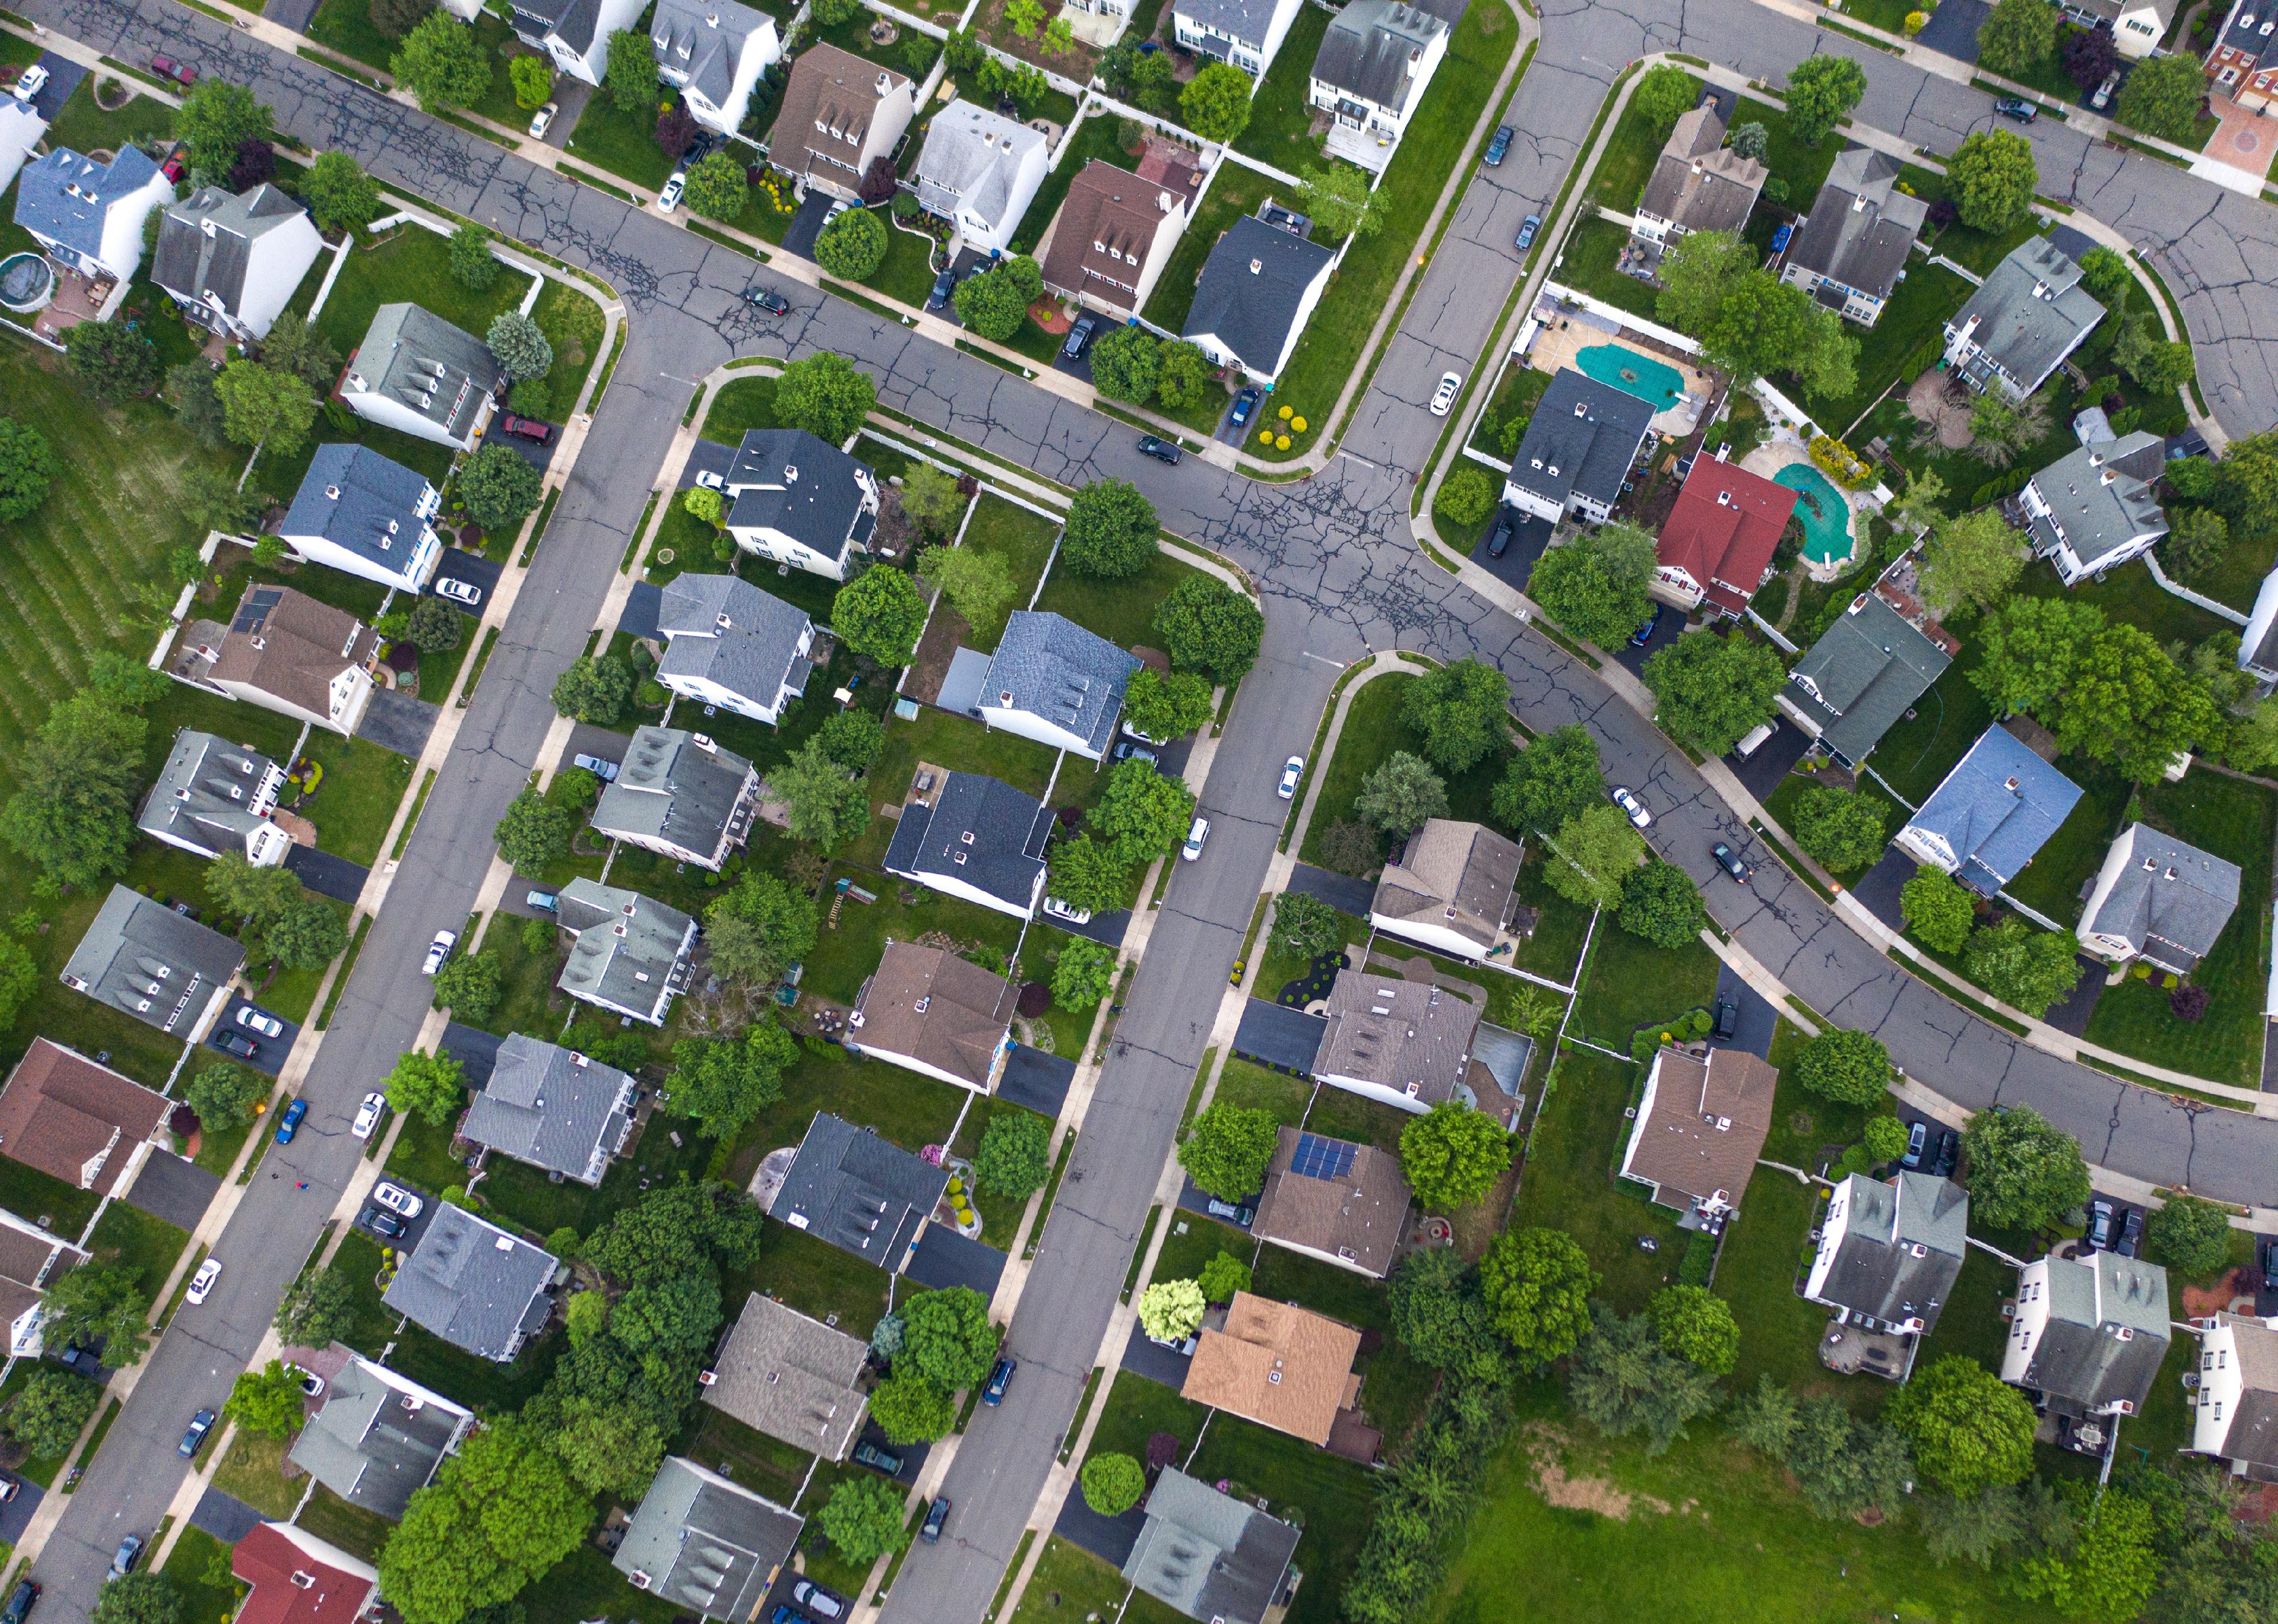 An aerial view of rows of homes.